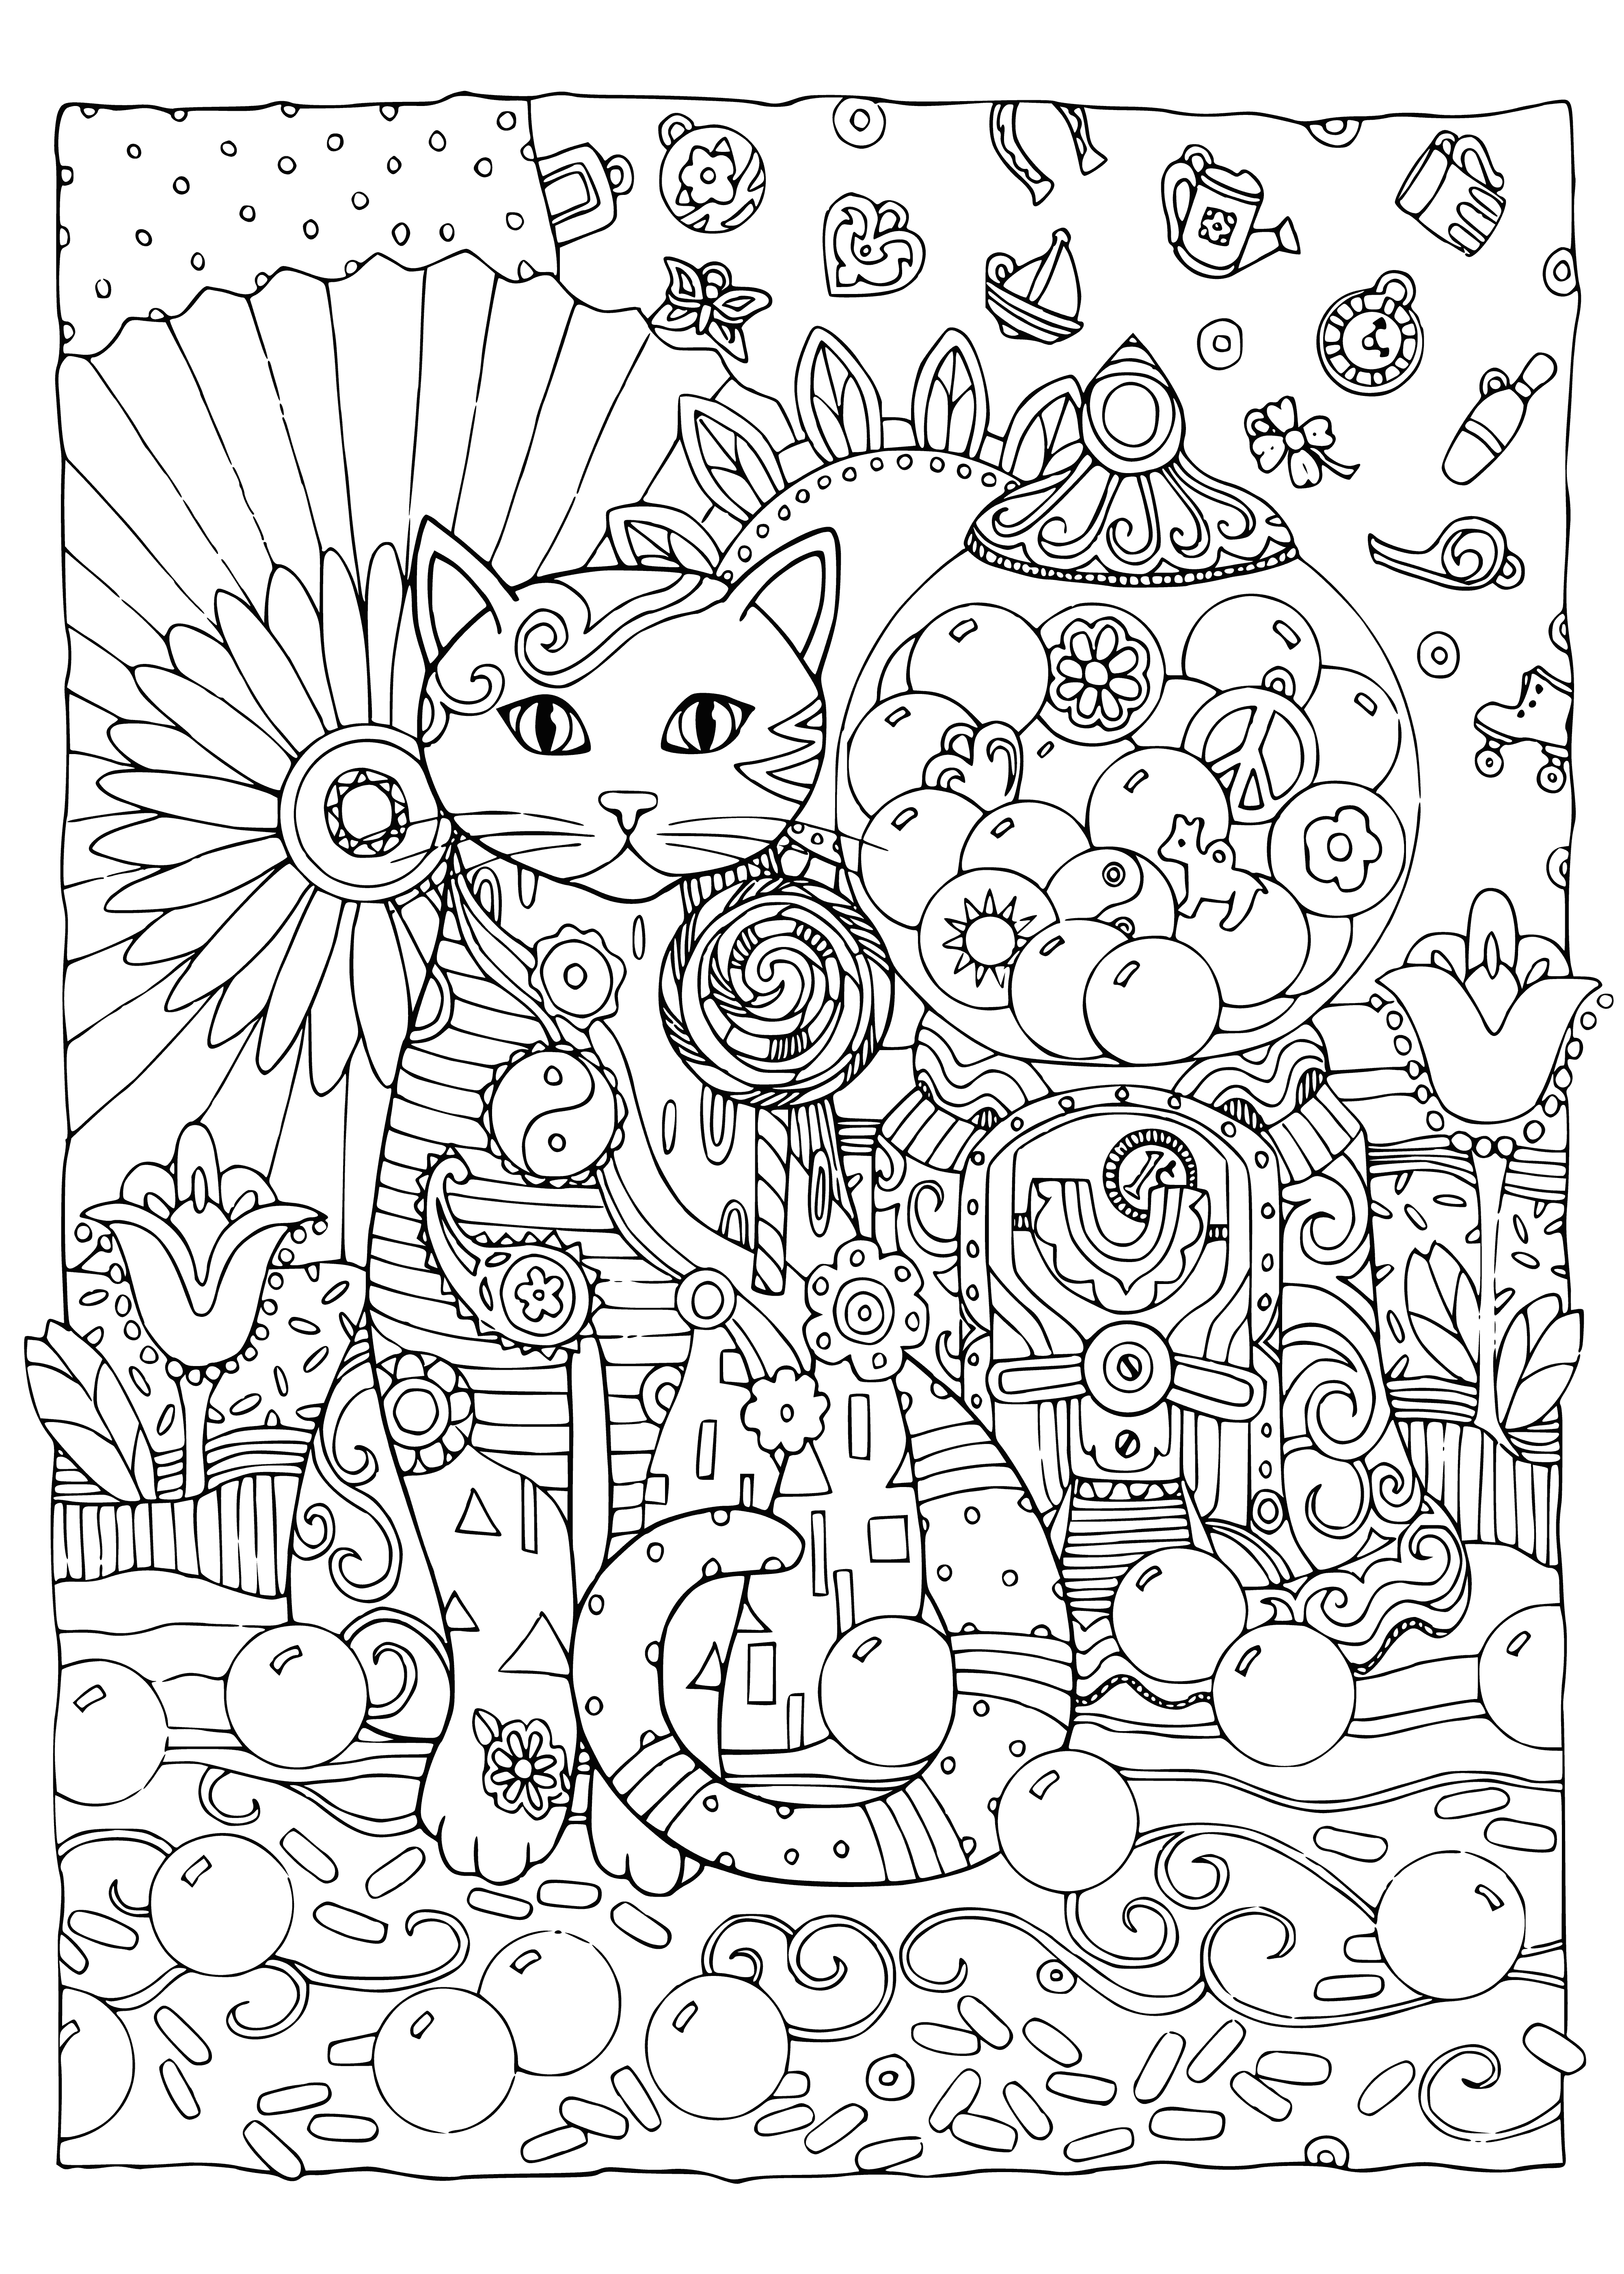 coloring page: Cats enjoy different flavored ice cream cones: cherry & chocolate with mint, waffle & blue with strawberry & cotton candy.